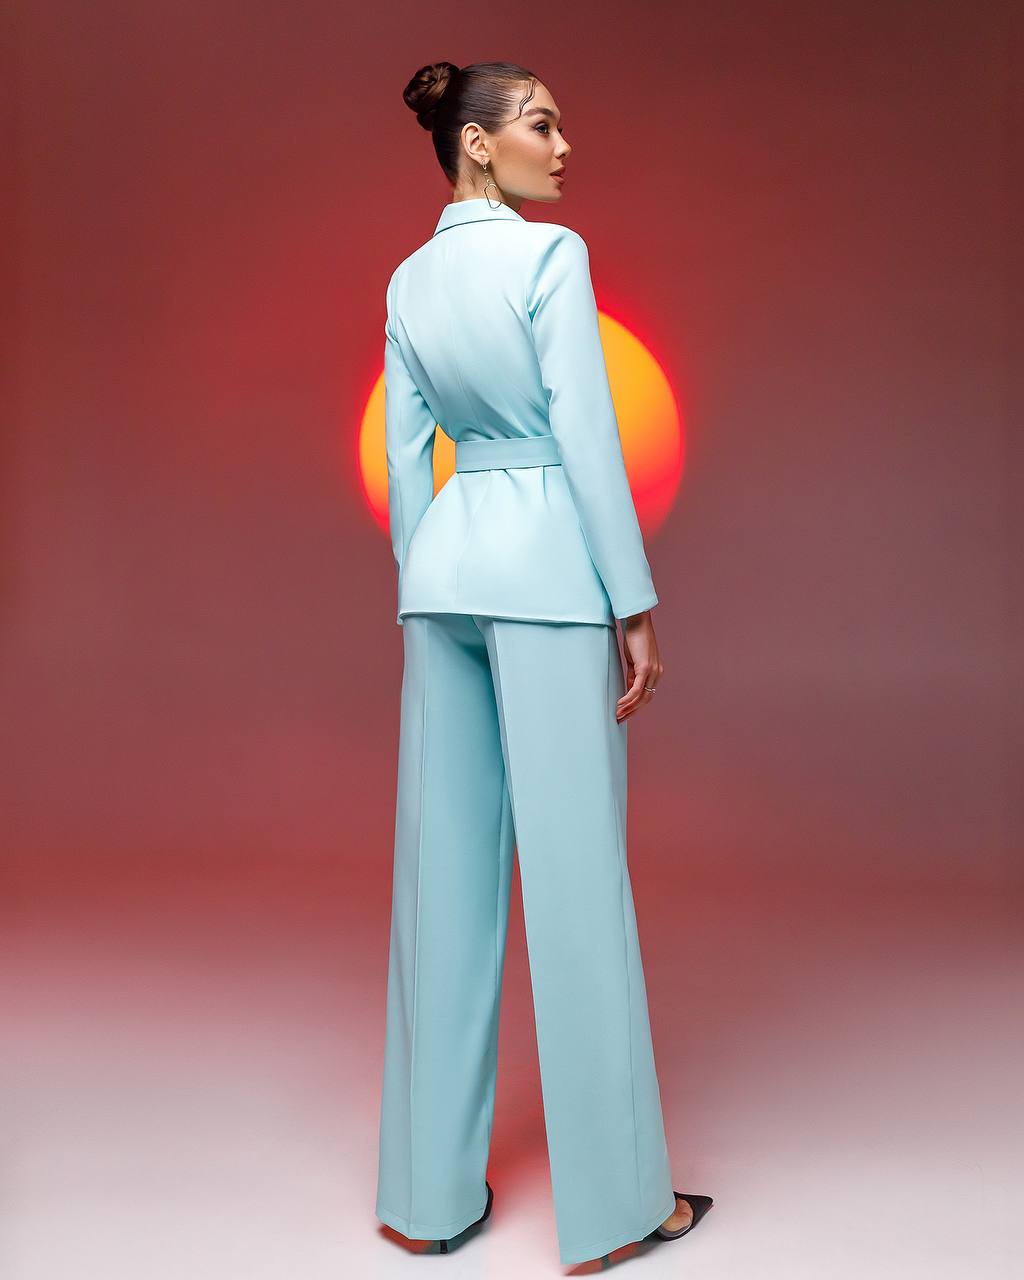 a woman in a light blue suit standing in front of a red background